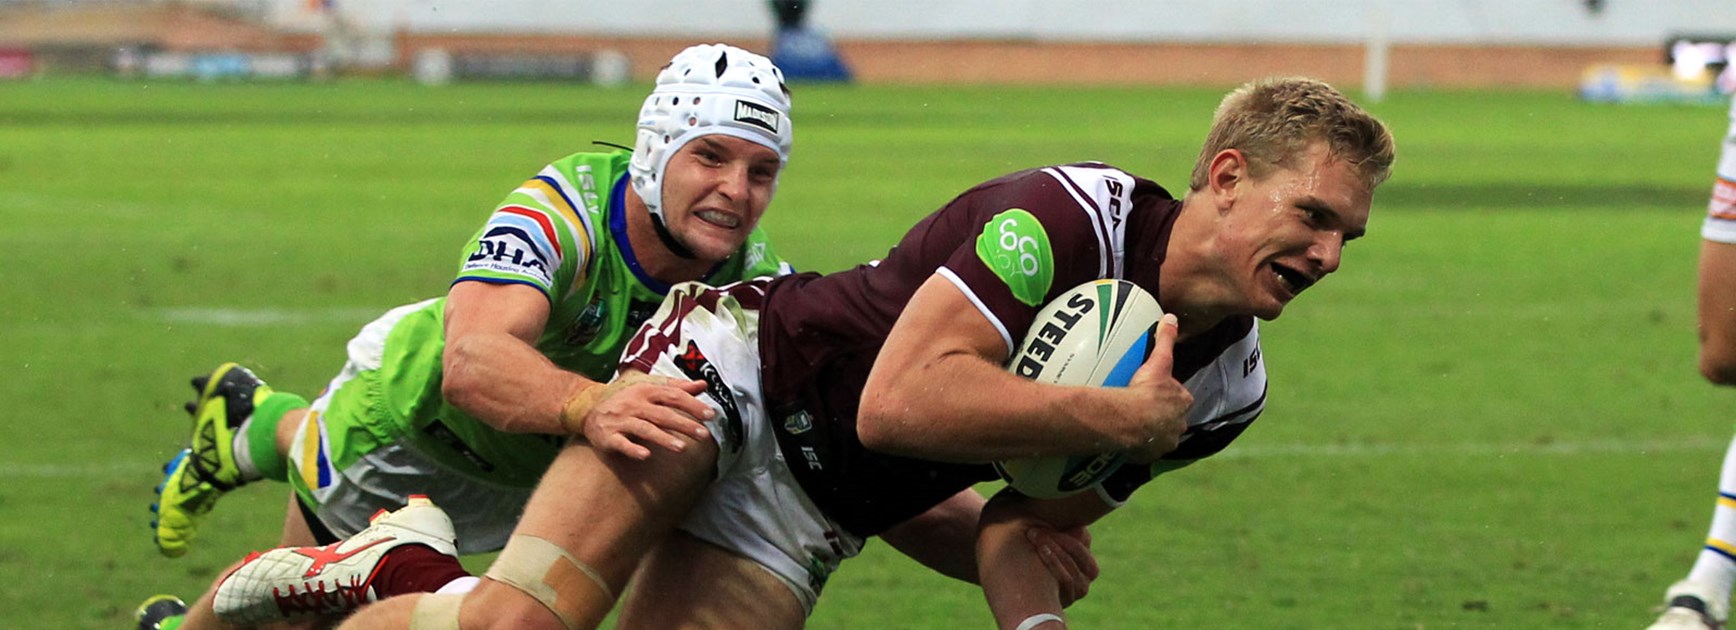 Manly's under-20s star Tom Trbojevic scored twice on his NRL debut against Canberra.